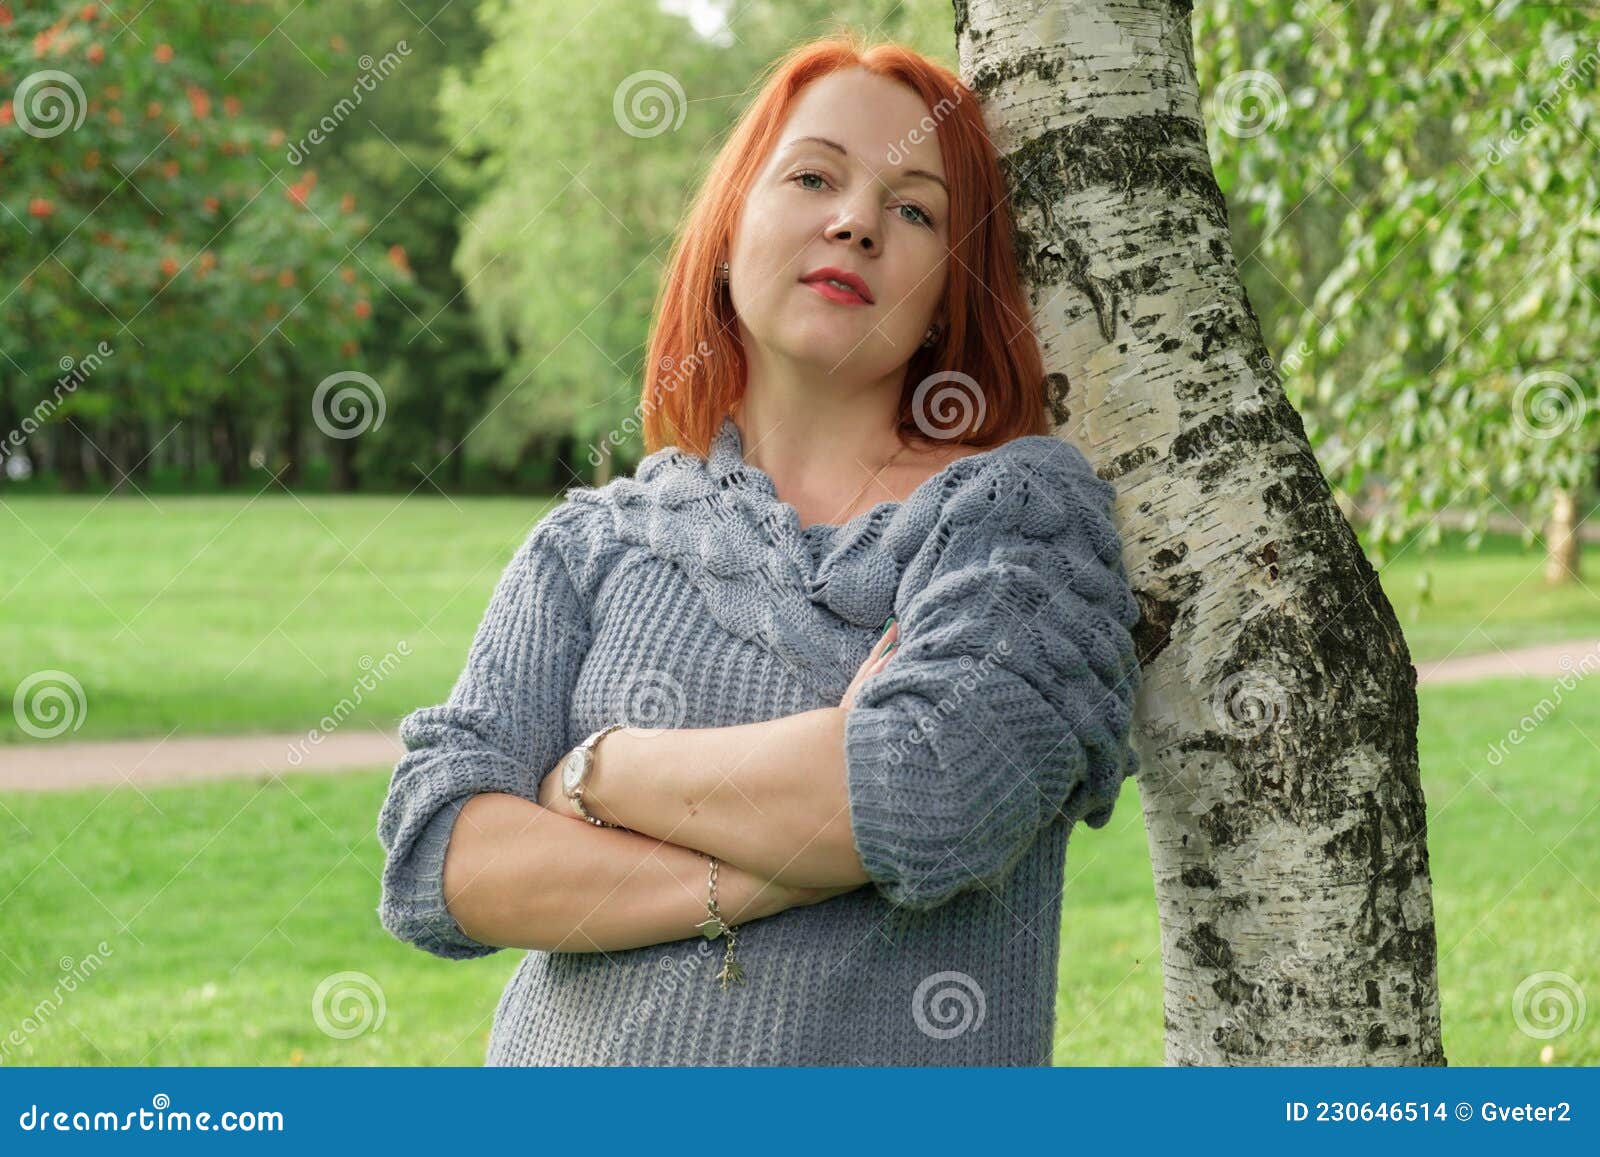 Woman with Red Hair in a Blue Knitted Sweater Stands by a Birch Tree ...